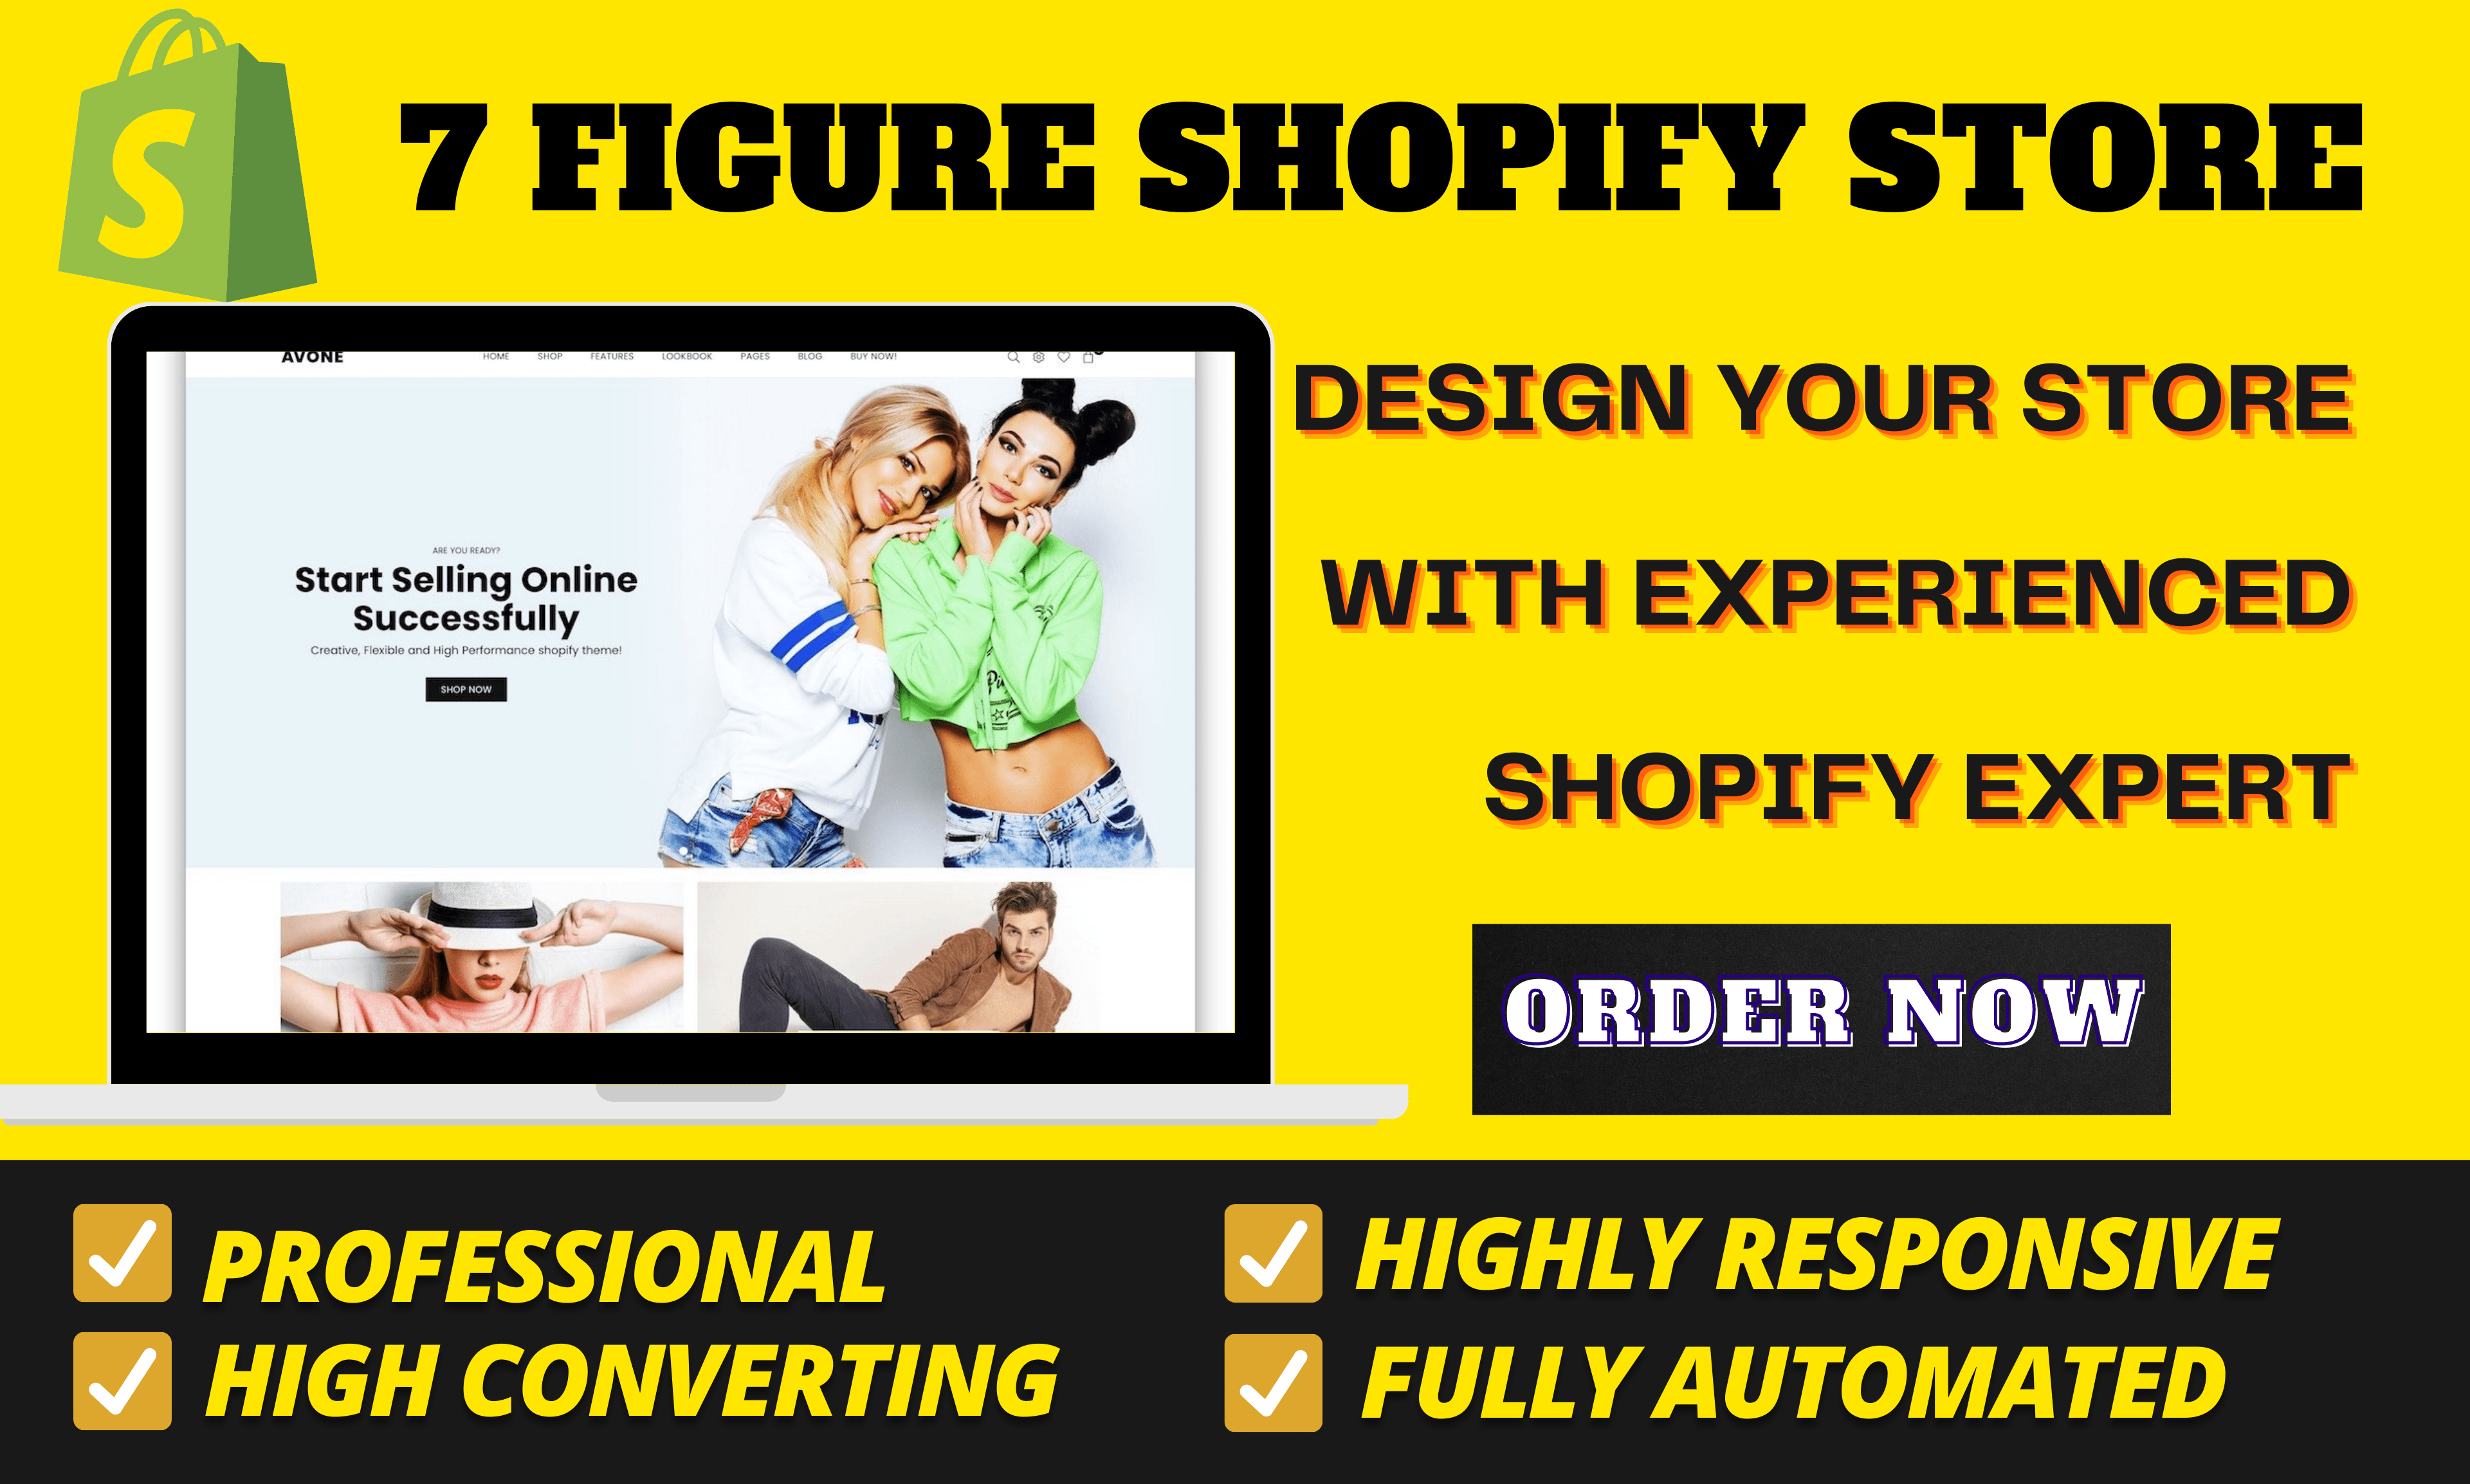 I will fabricate converting shopify store, shopify website design, FiverrBox